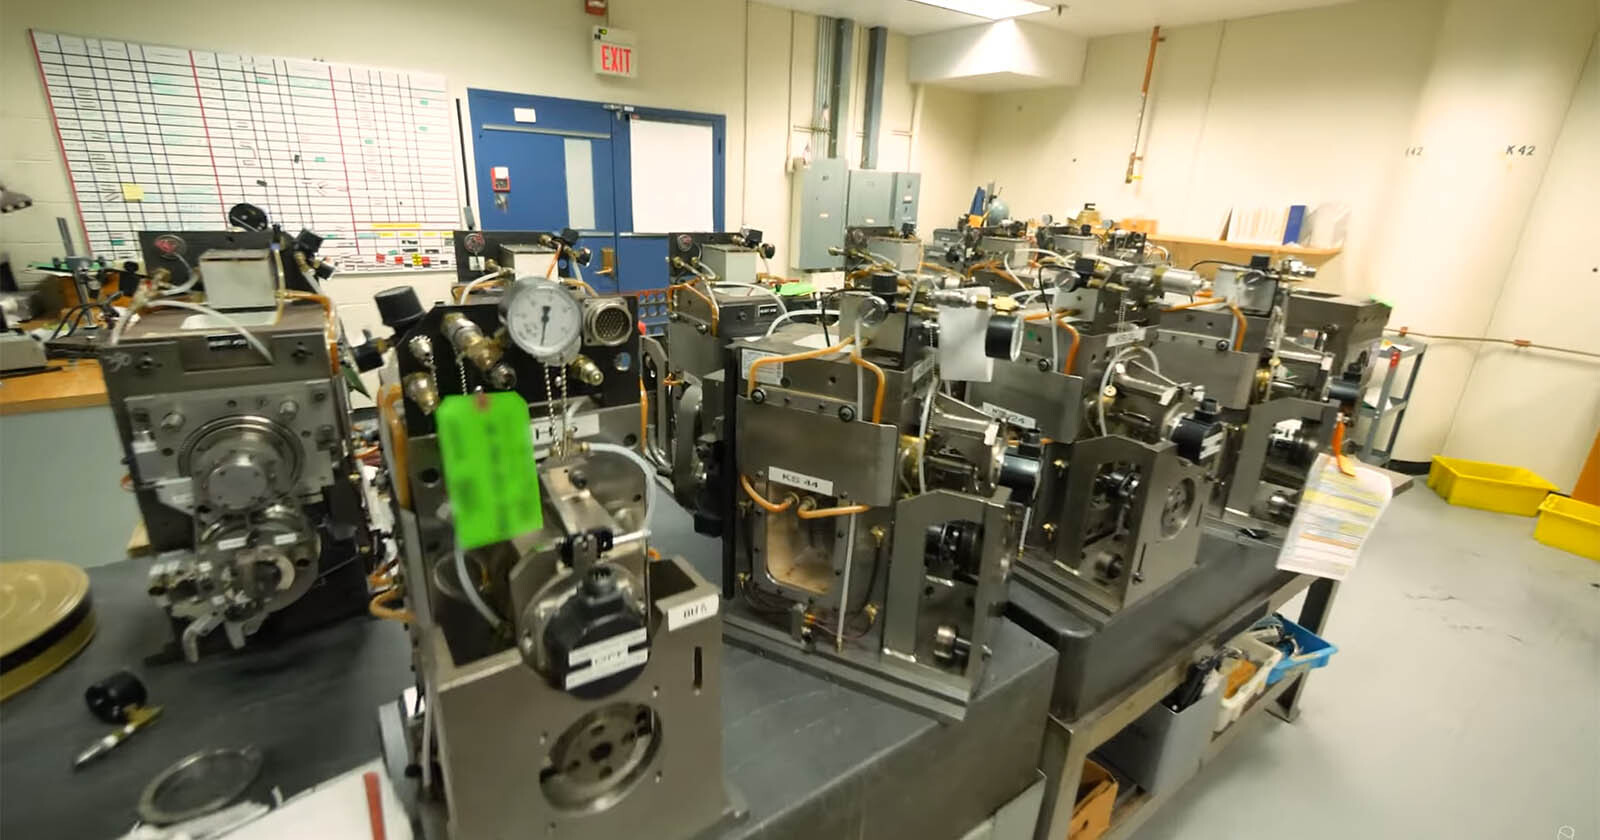 See How Kodak Makes Film Through a Behind-the-Scenes Factory Tour